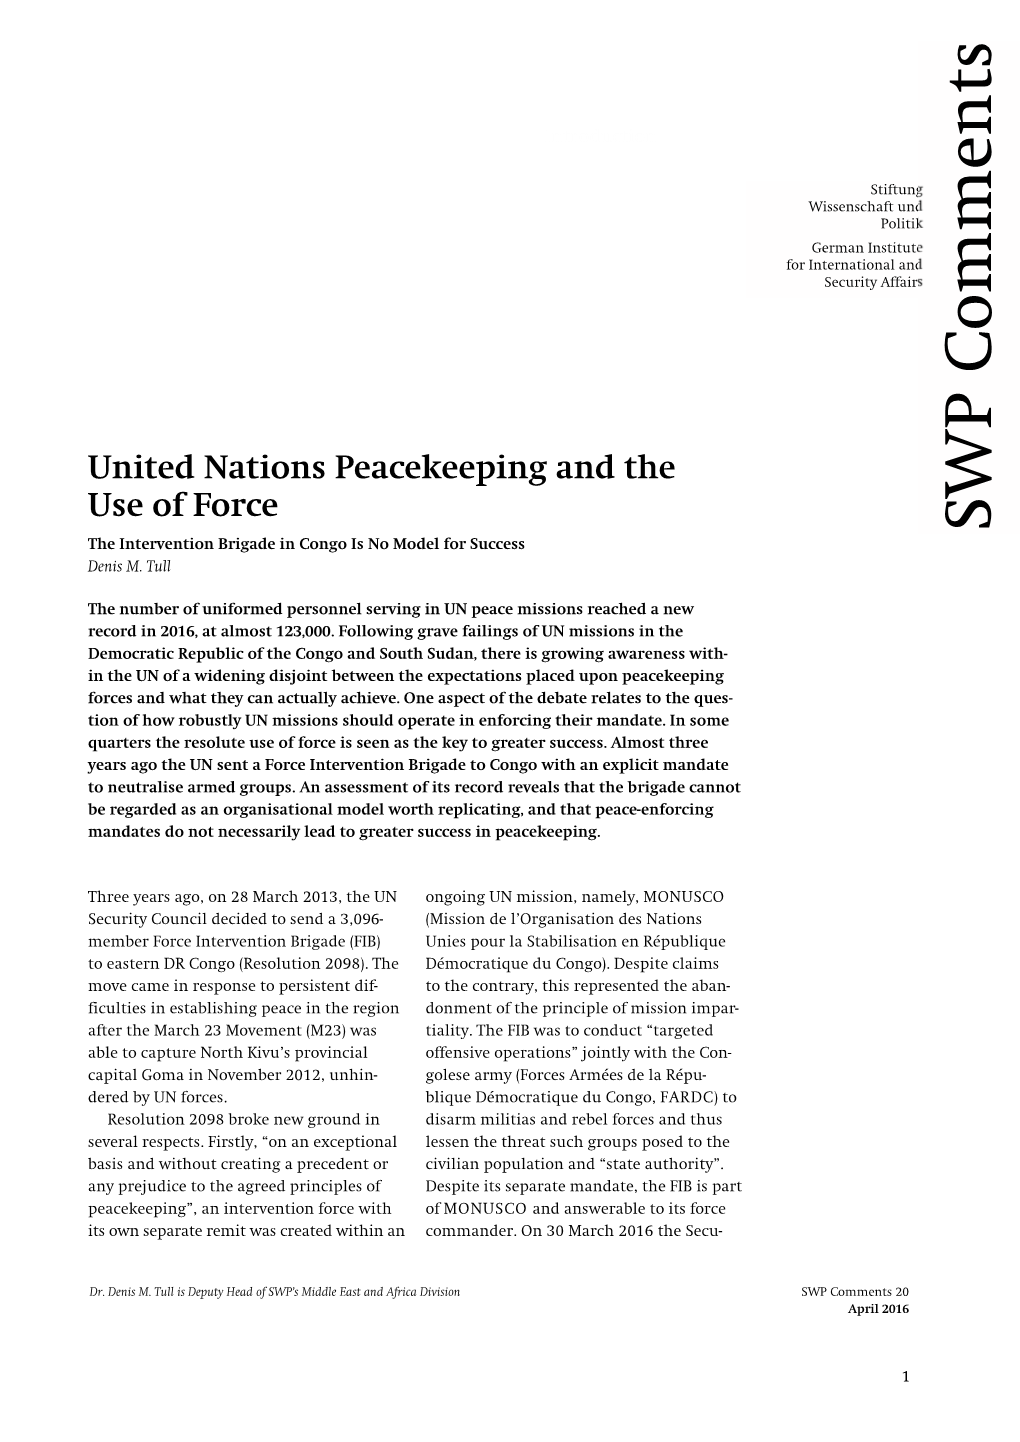 United Nations Peacekeeping and the Use of Force. the Intervention